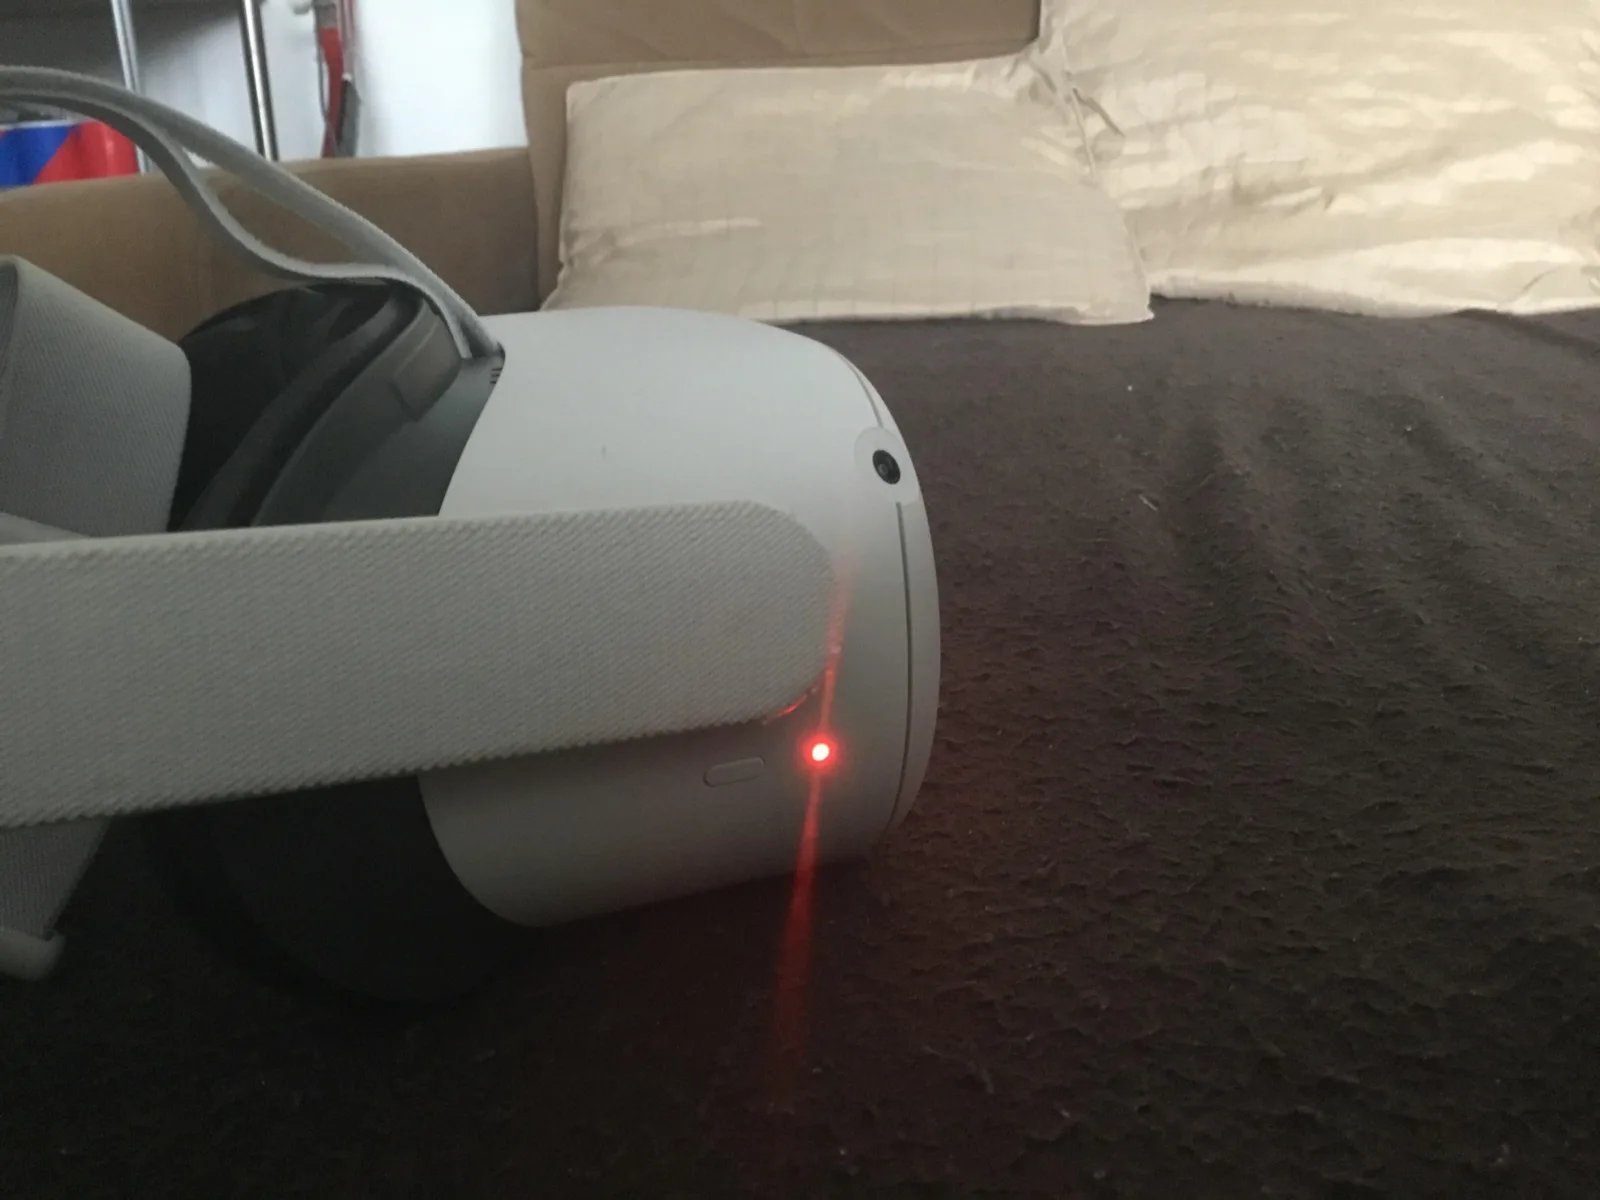 How to Fix the Red LED Issue on Quest 2 Charging? 1